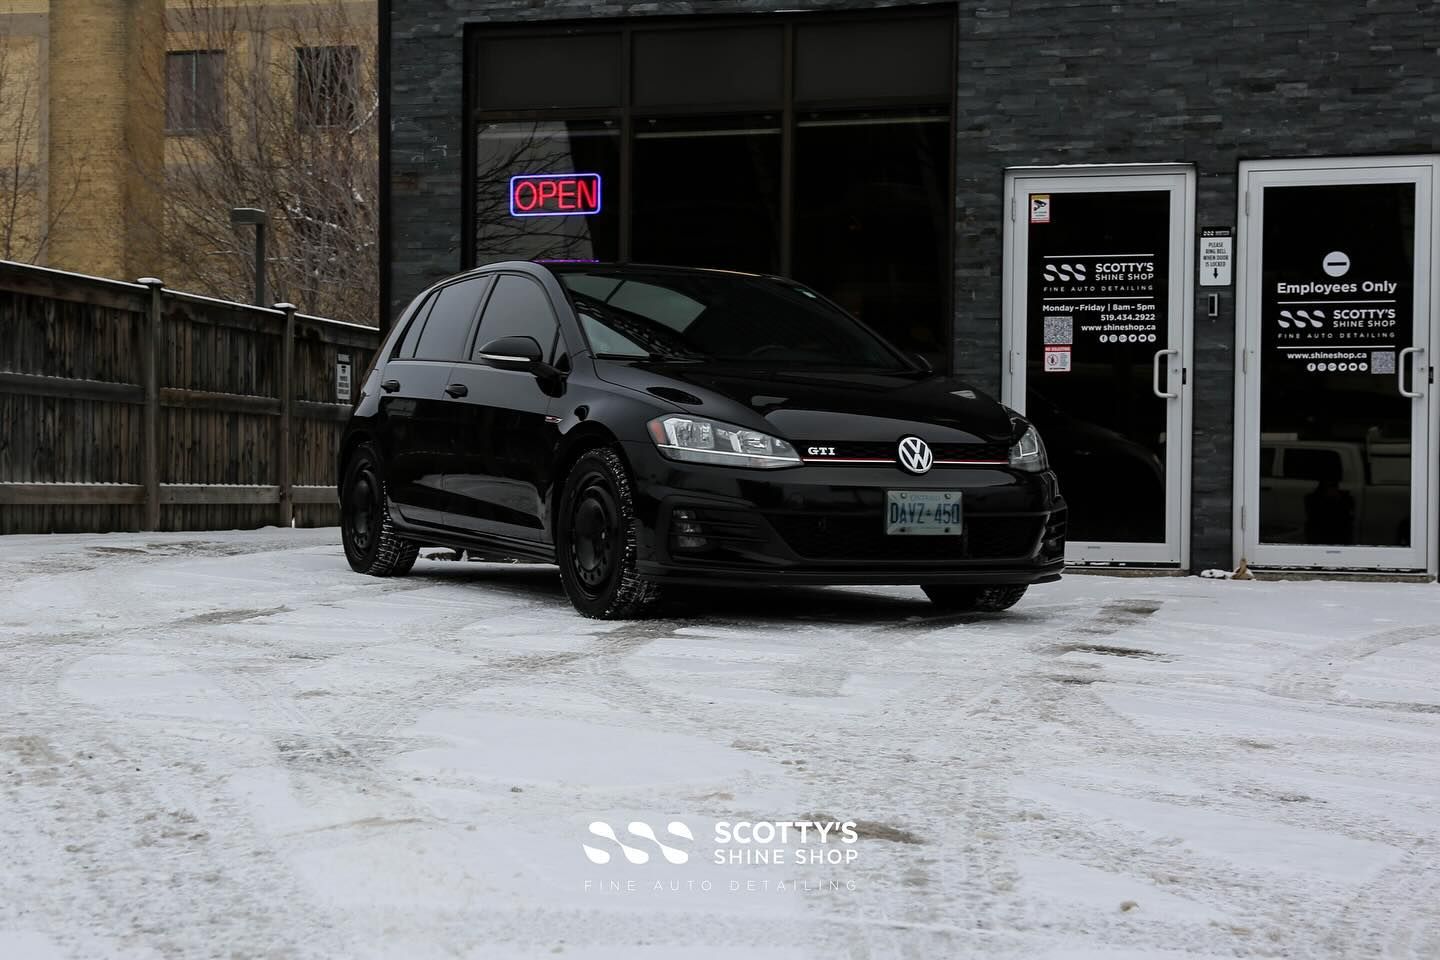 2018 VW Golf GTI Paint Correction, Xpel Fusion Premium Ceramic Coating and Xpel Prime CS Window Tint London, ON Canada